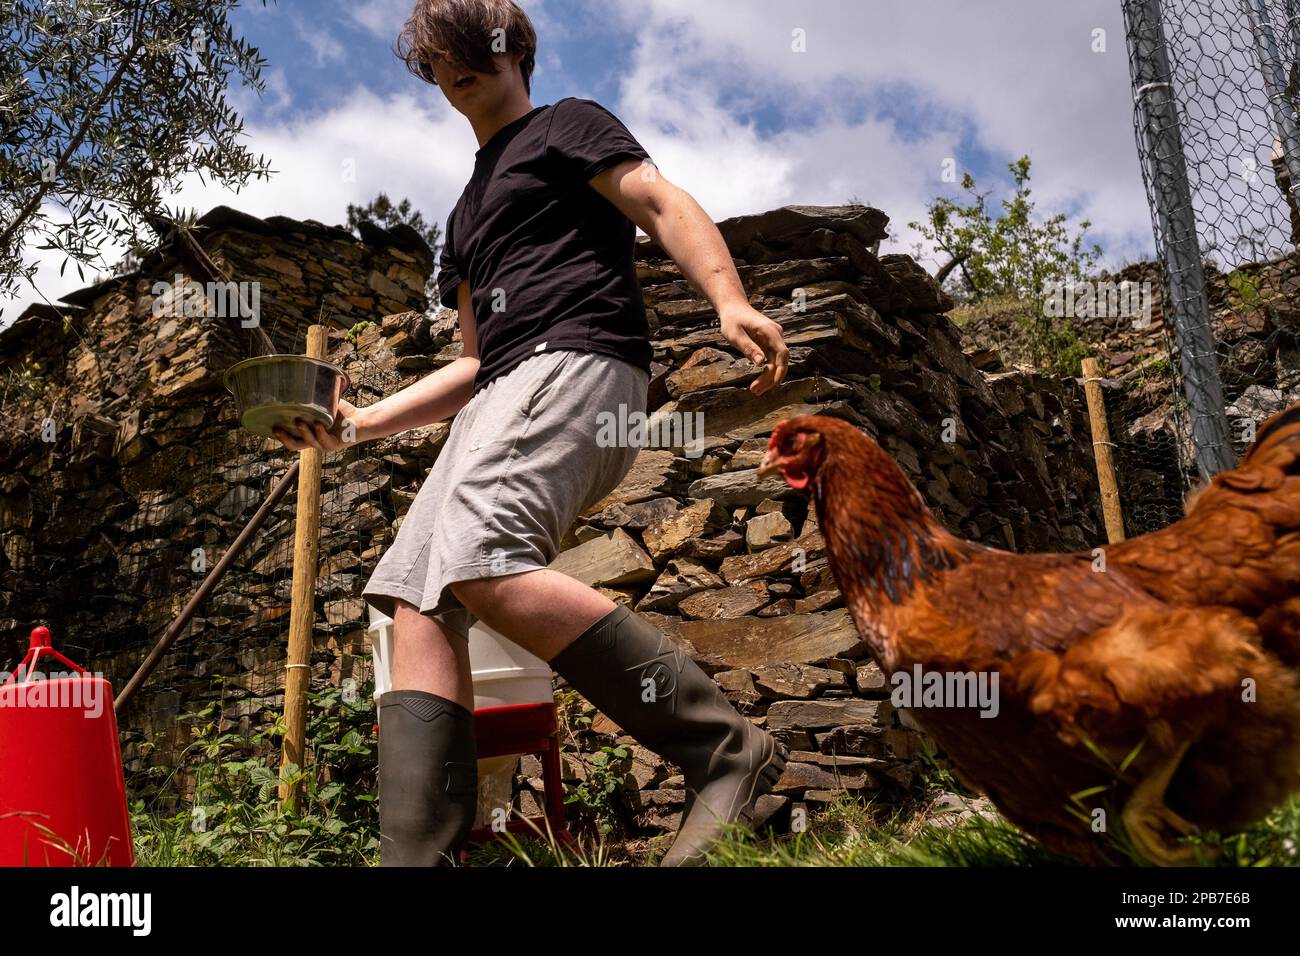 People feeding hens at the eco-village of Loural in the mountains of central Portugal. Here, the Klein family and their partners have been working on an ambitious project to rehabilitate a small village that has been abandoned since the year 2000 into an eco-location. On 30 hectares, the aim is to improve the ecosystem by practicing organic agriculture, reforestation and the production of green energy. The small stone village is moving towards food and energy autonomy and its vegetation is gradually coming back to life. The place is starting to provide integrative health training and artistic Stock Photo